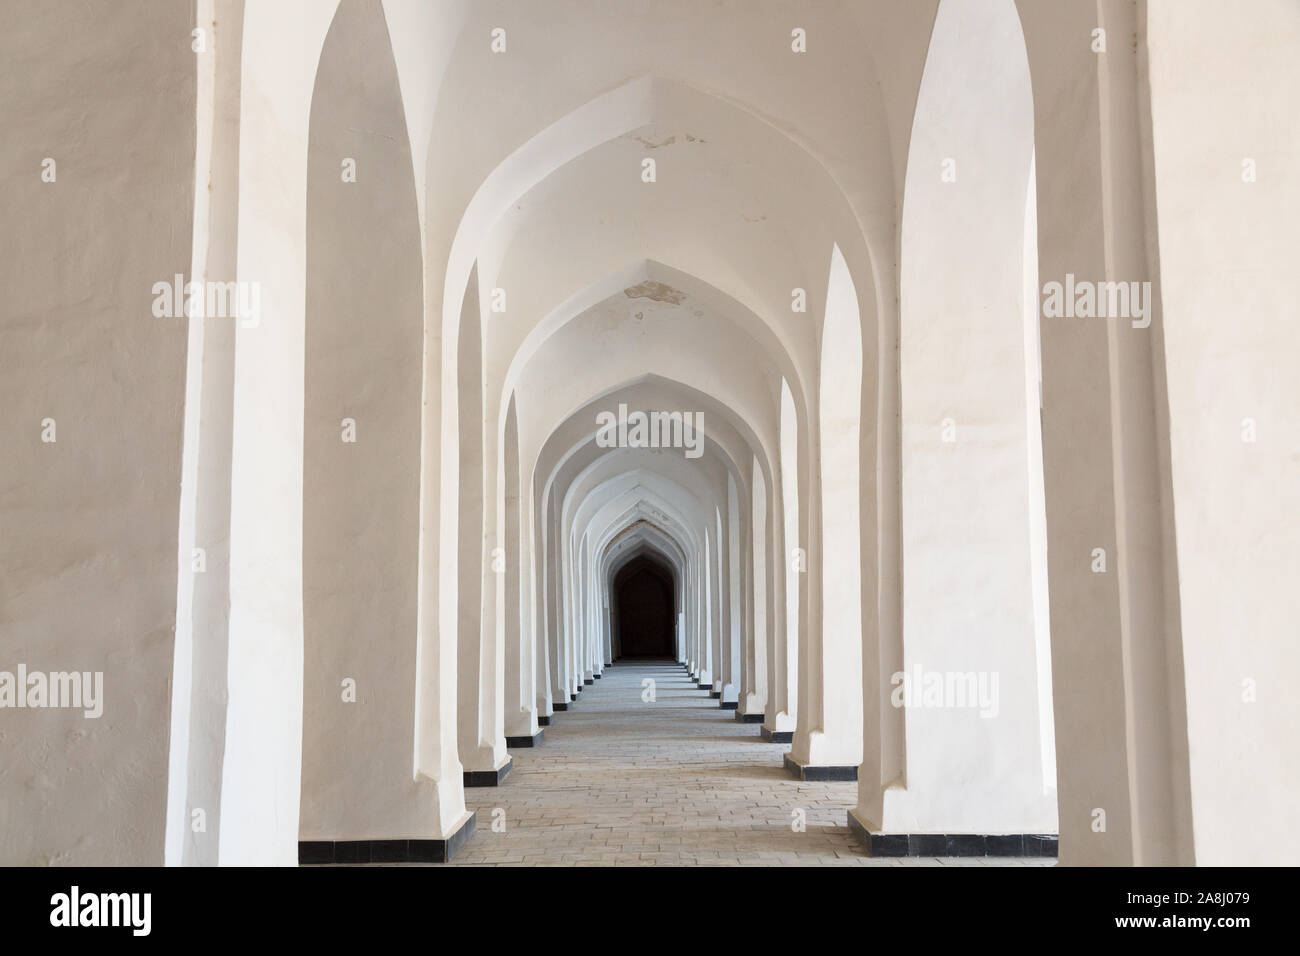 Brick Stone Arches High Resolution Stock Photography and Images - Alamy